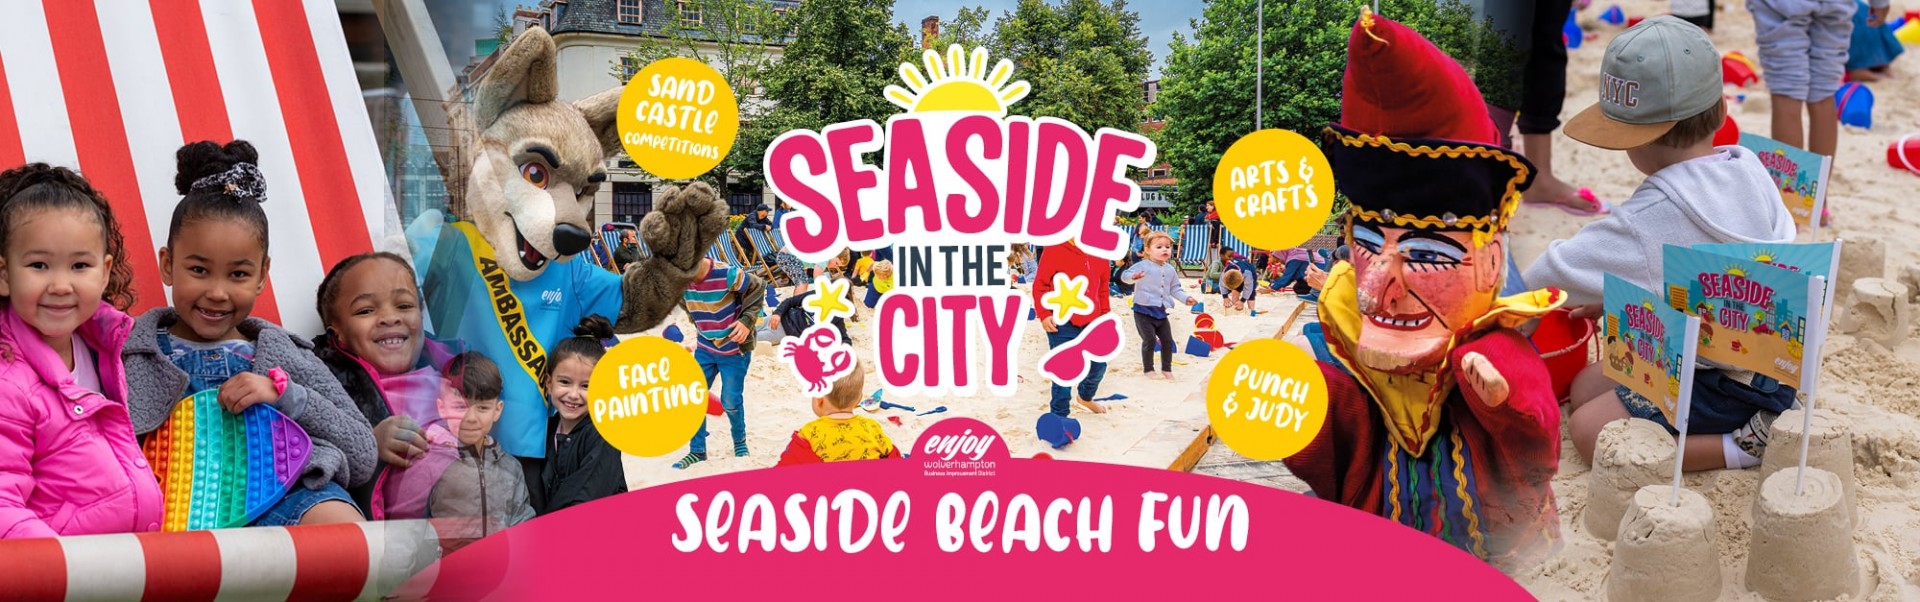 Seaside in the city banner